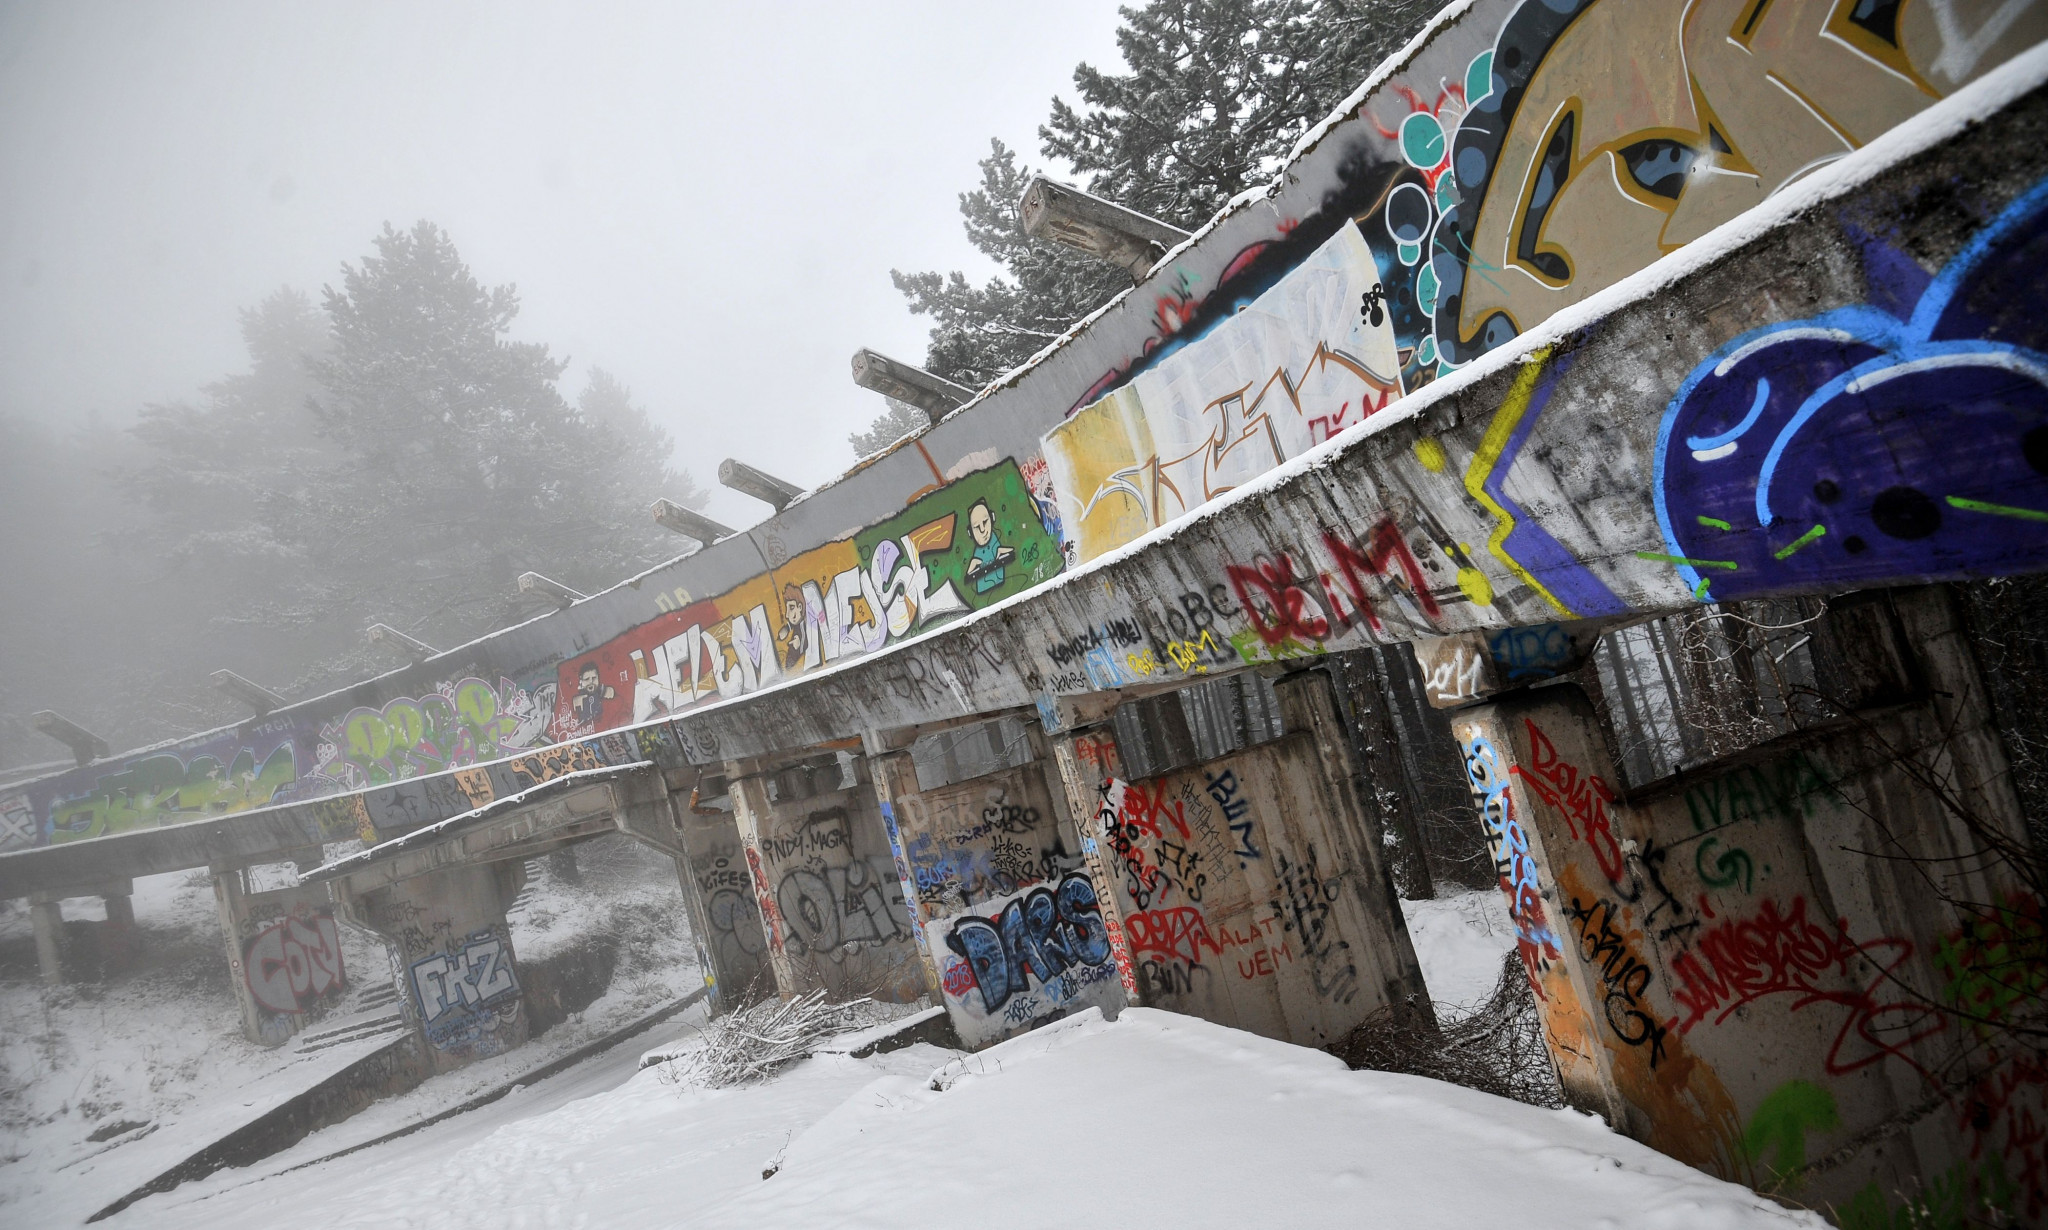 Sarajevo 1984 Winter Olympic bobsleigh track set to be re-built